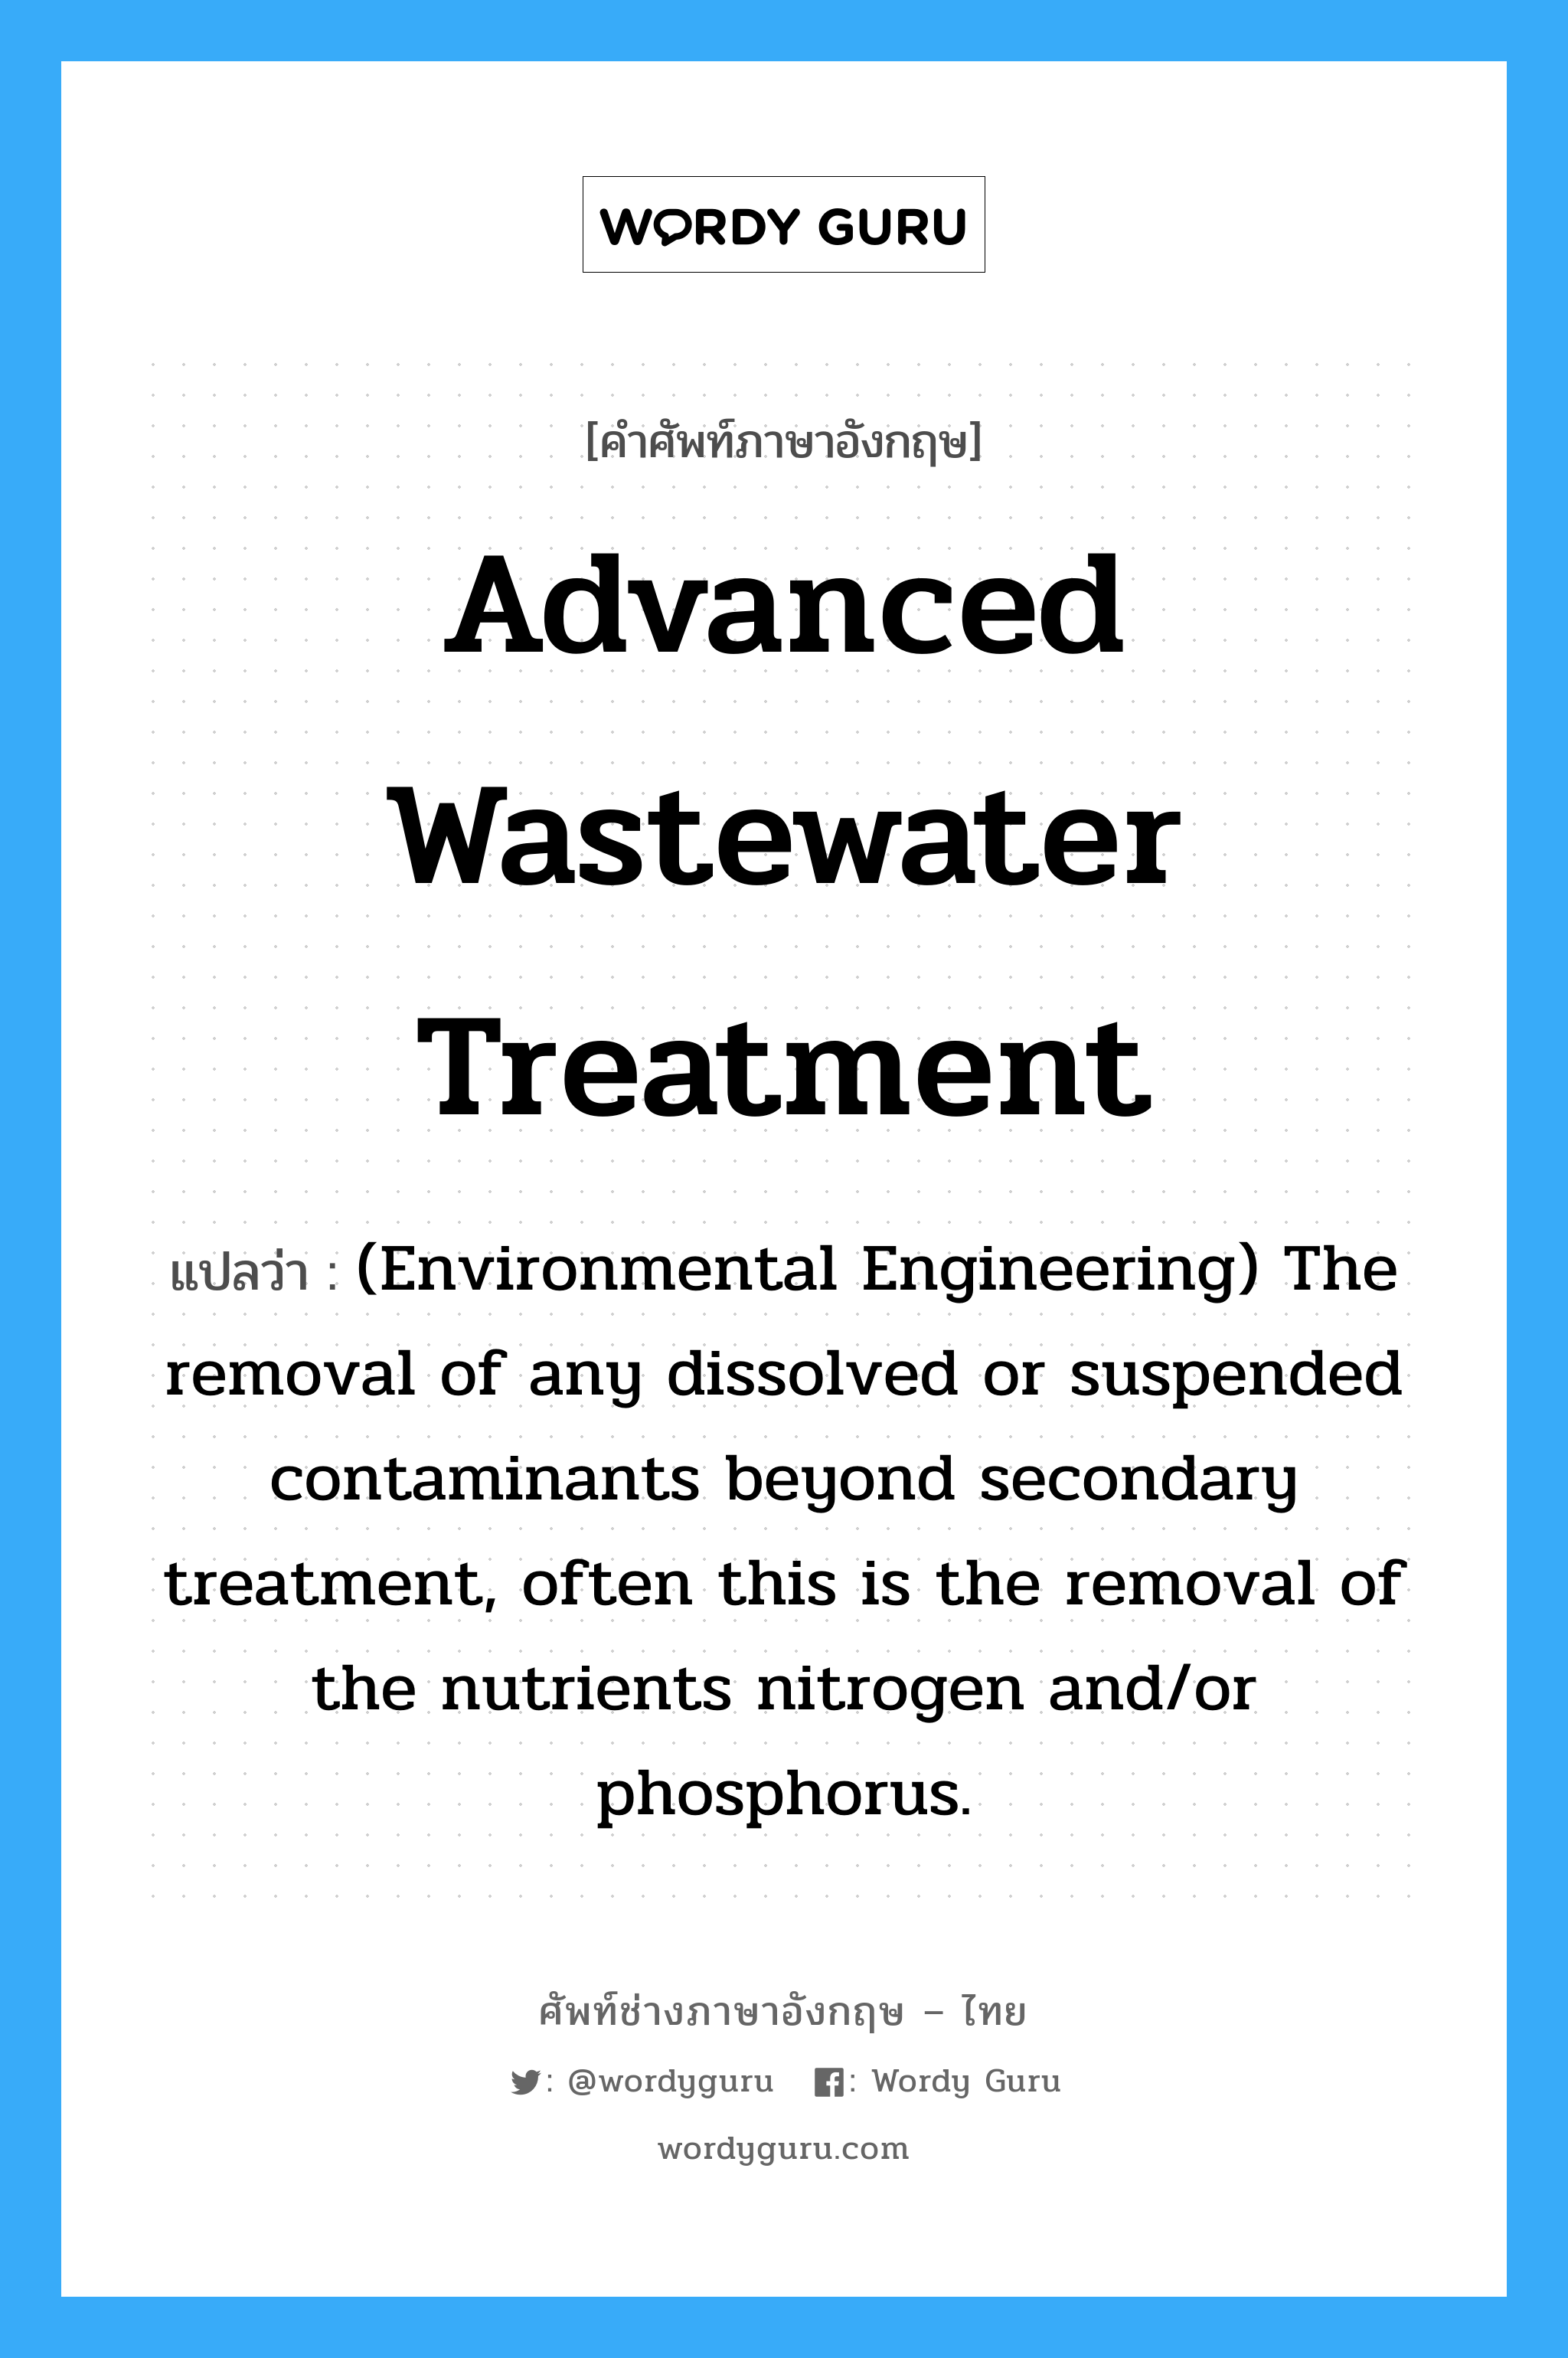 Advanced wastewater treatment แปลว่า?, คำศัพท์ช่างภาษาอังกฤษ - ไทย Advanced wastewater treatment คำศัพท์ภาษาอังกฤษ Advanced wastewater treatment แปลว่า (Environmental Engineering) The removal of any dissolved or suspended contaminants beyond secondary treatment, often this is the removal of the nutrients nitrogen and/or phosphorus.